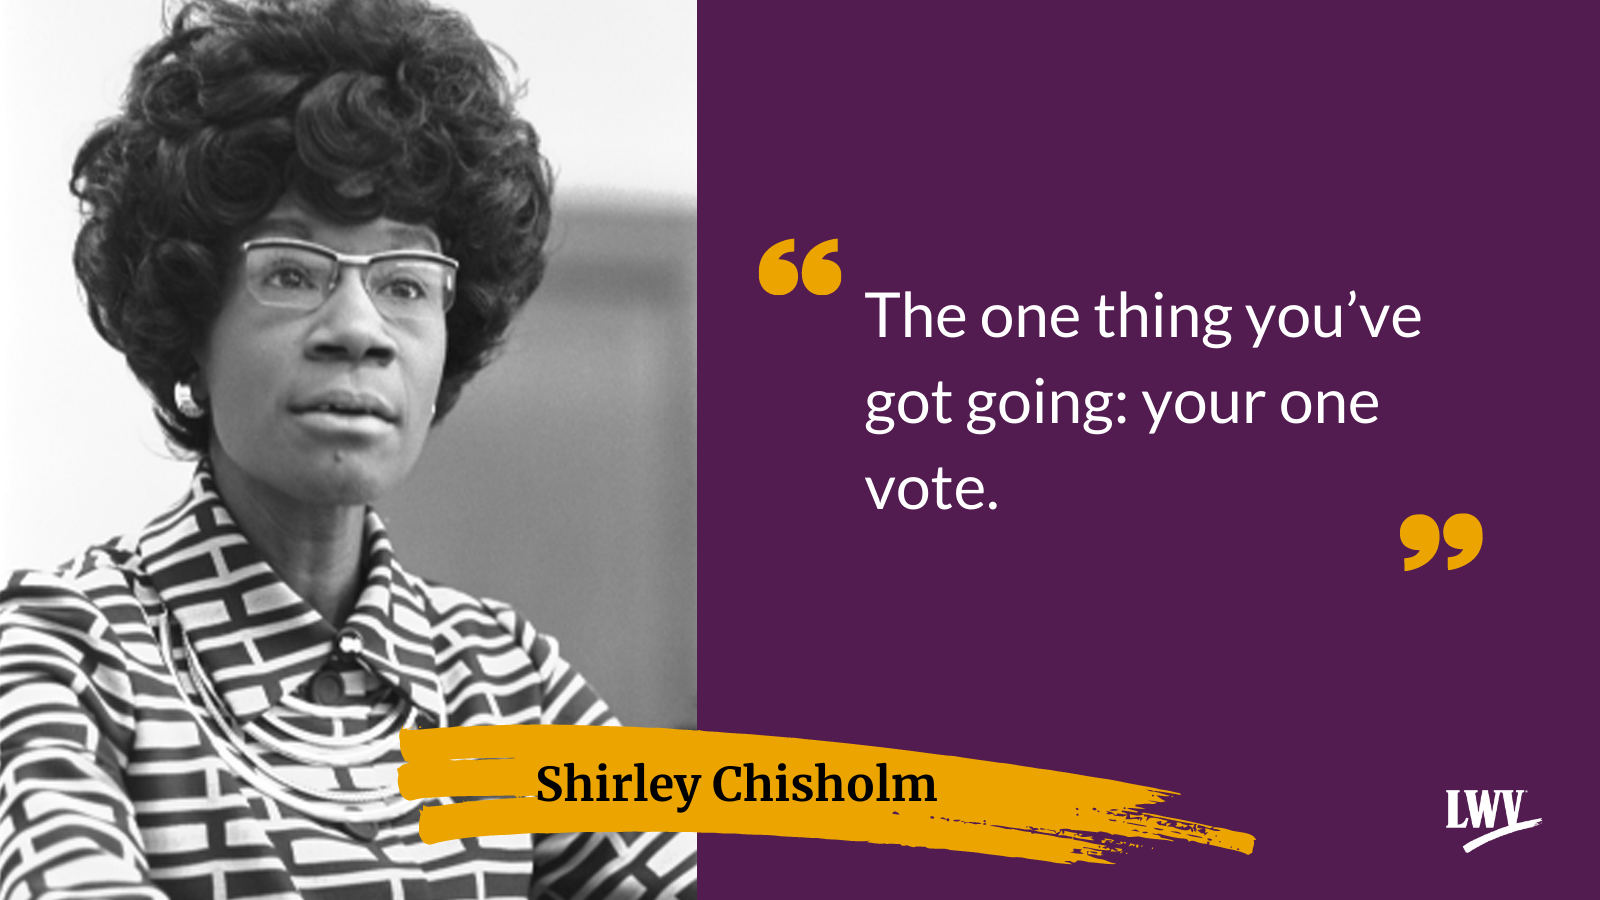 Shirley Chisholm My Personal League Hero League of Women Voters